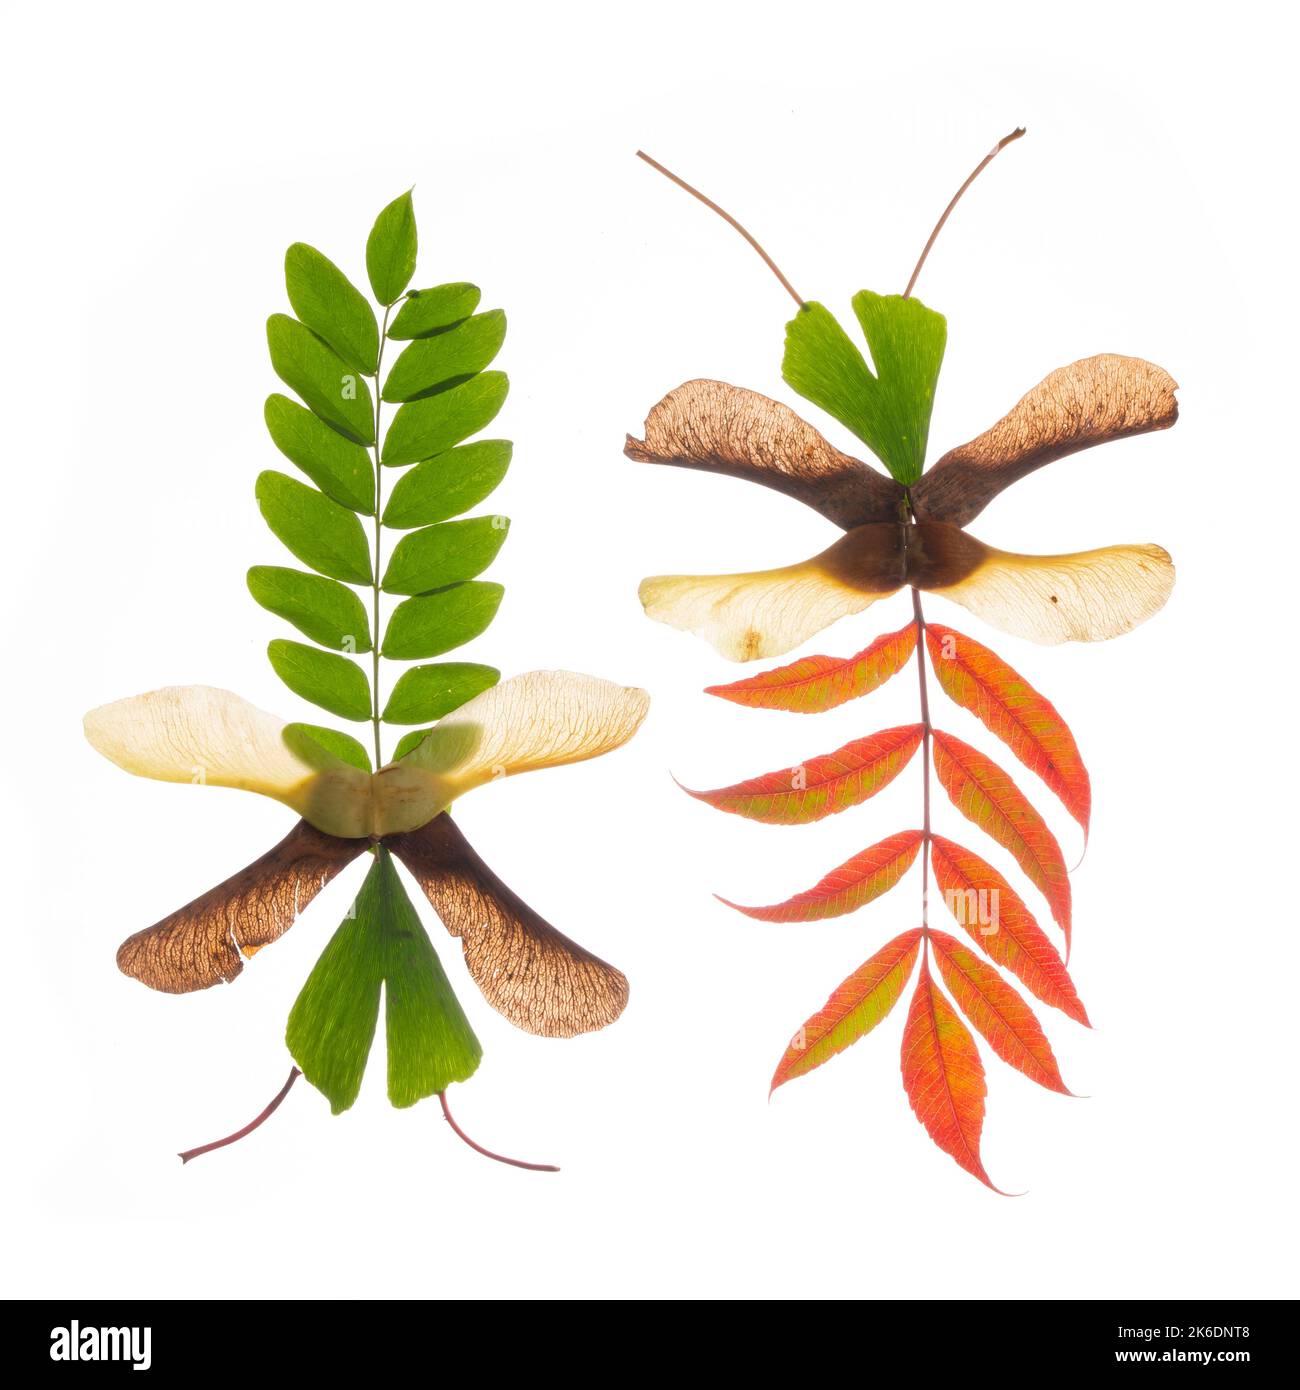 Collage craft dragon flies, autumn crafts made of natural materials. Stock Photo